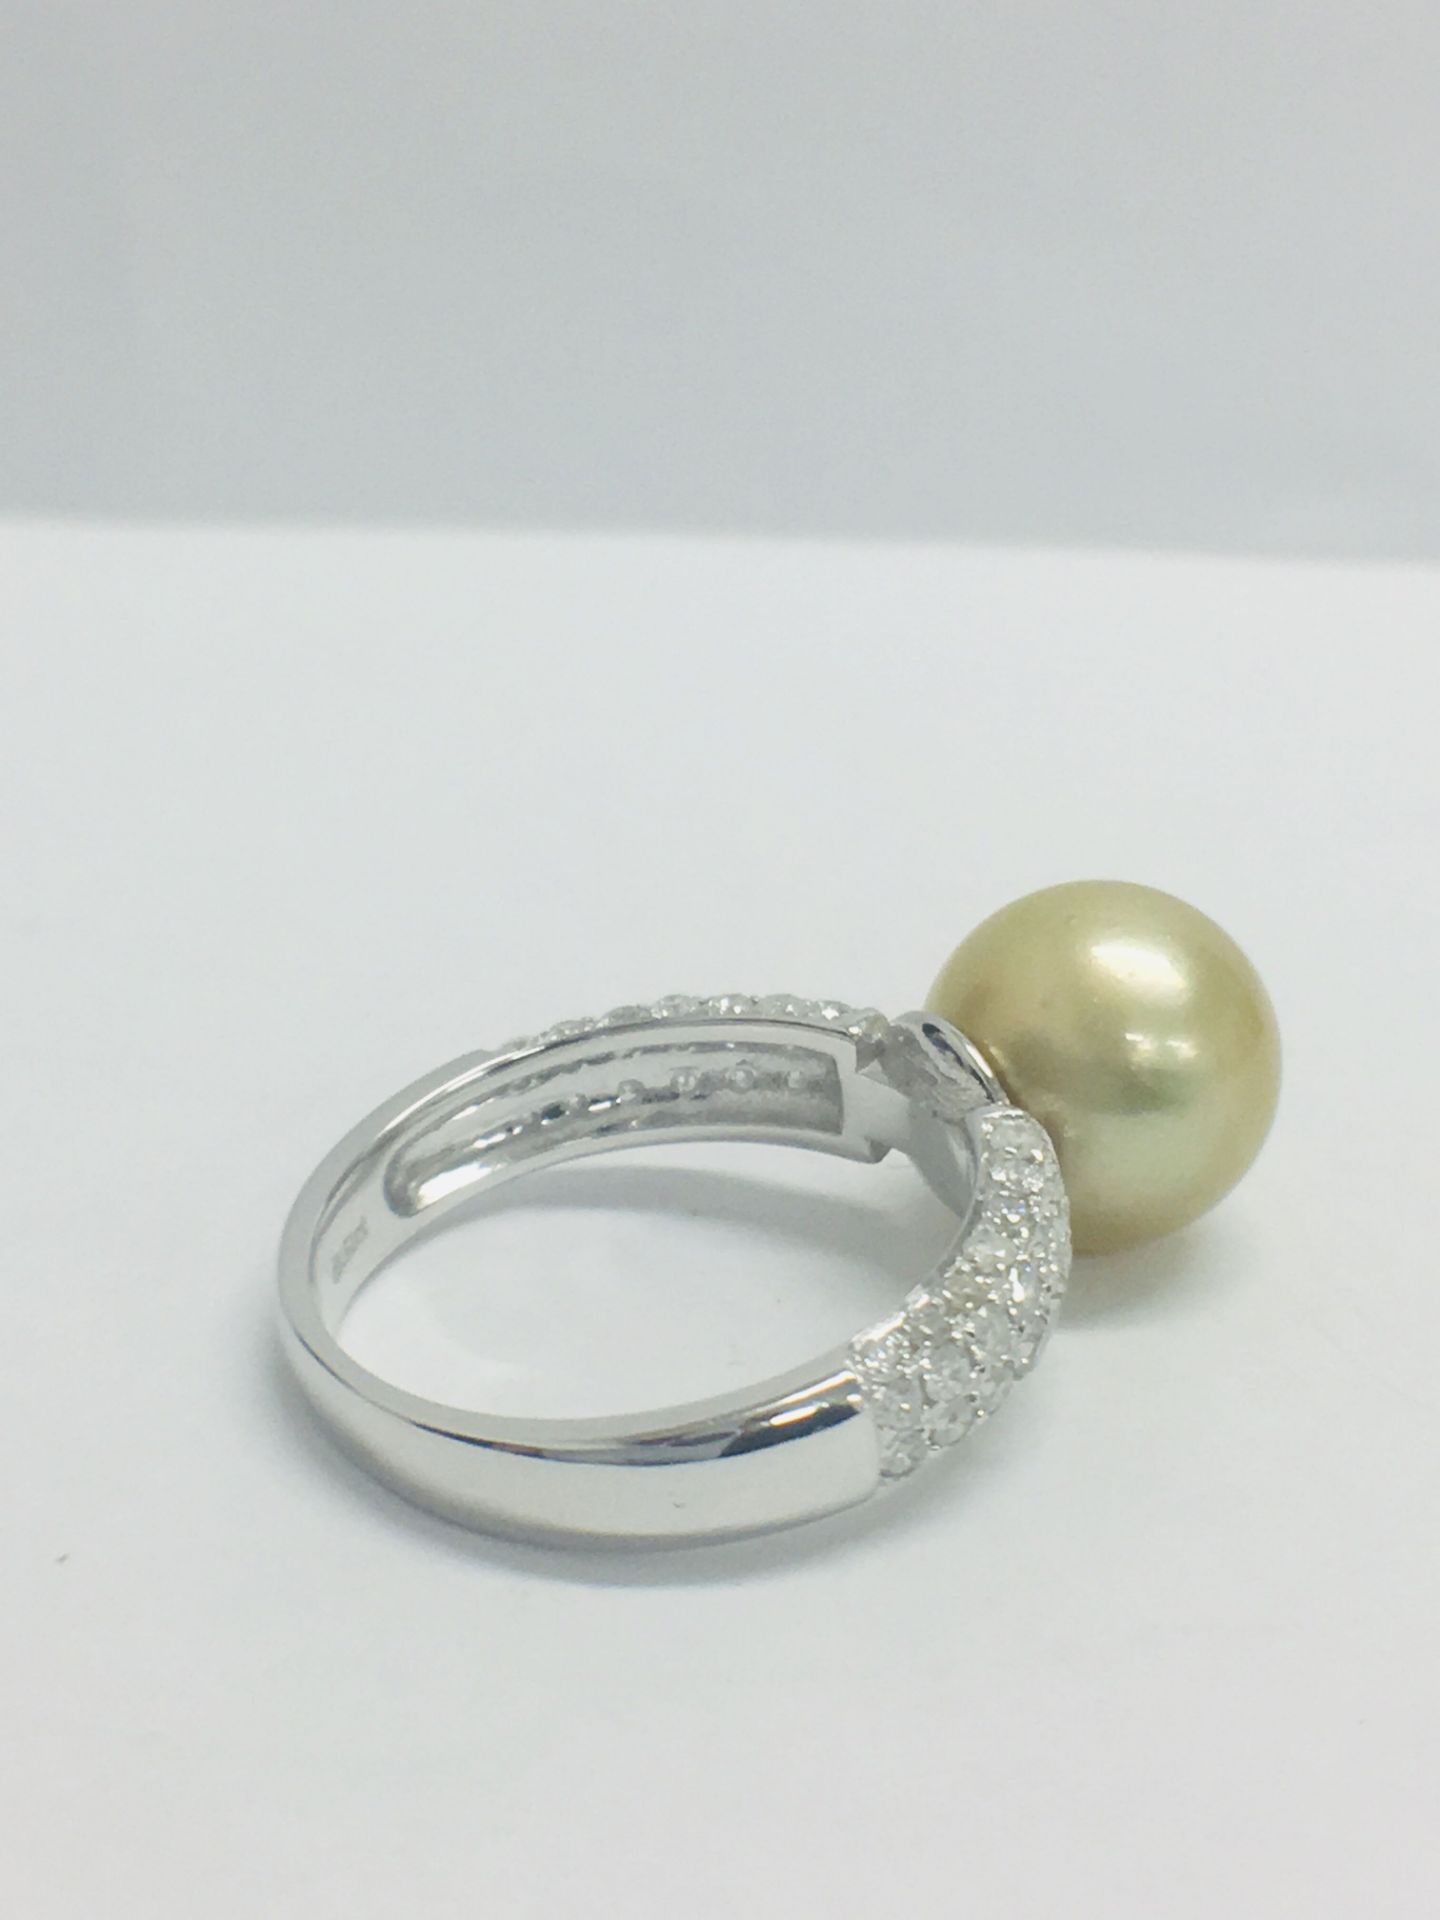 14ct White Gold Pearl & Diamond Ring - Image 5 of 8